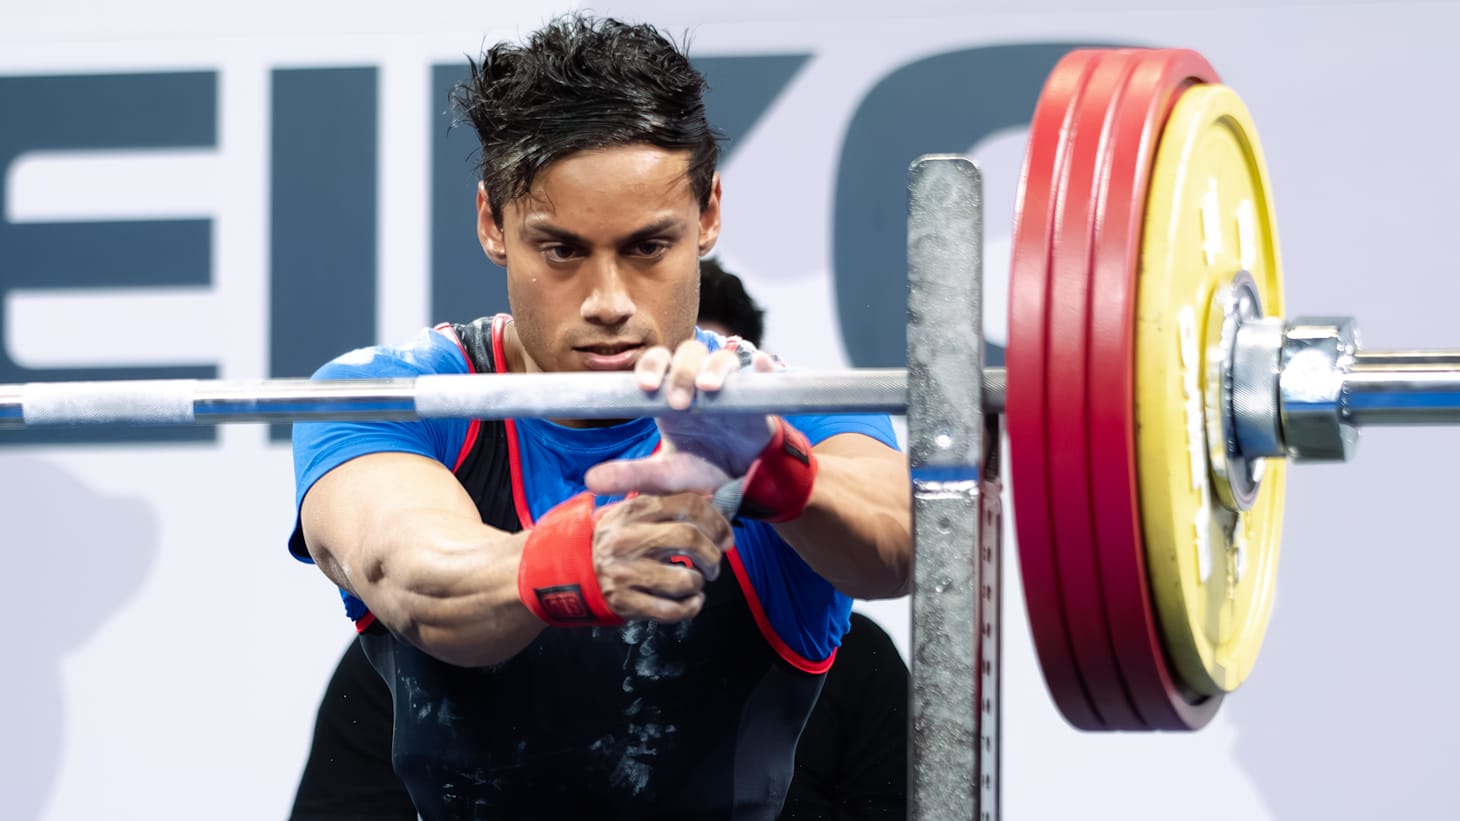 IPF World Open Classic Powerlifting Championships 2023 Full competition schedule, key competitors, and how to watch the action live on Olympic Channel